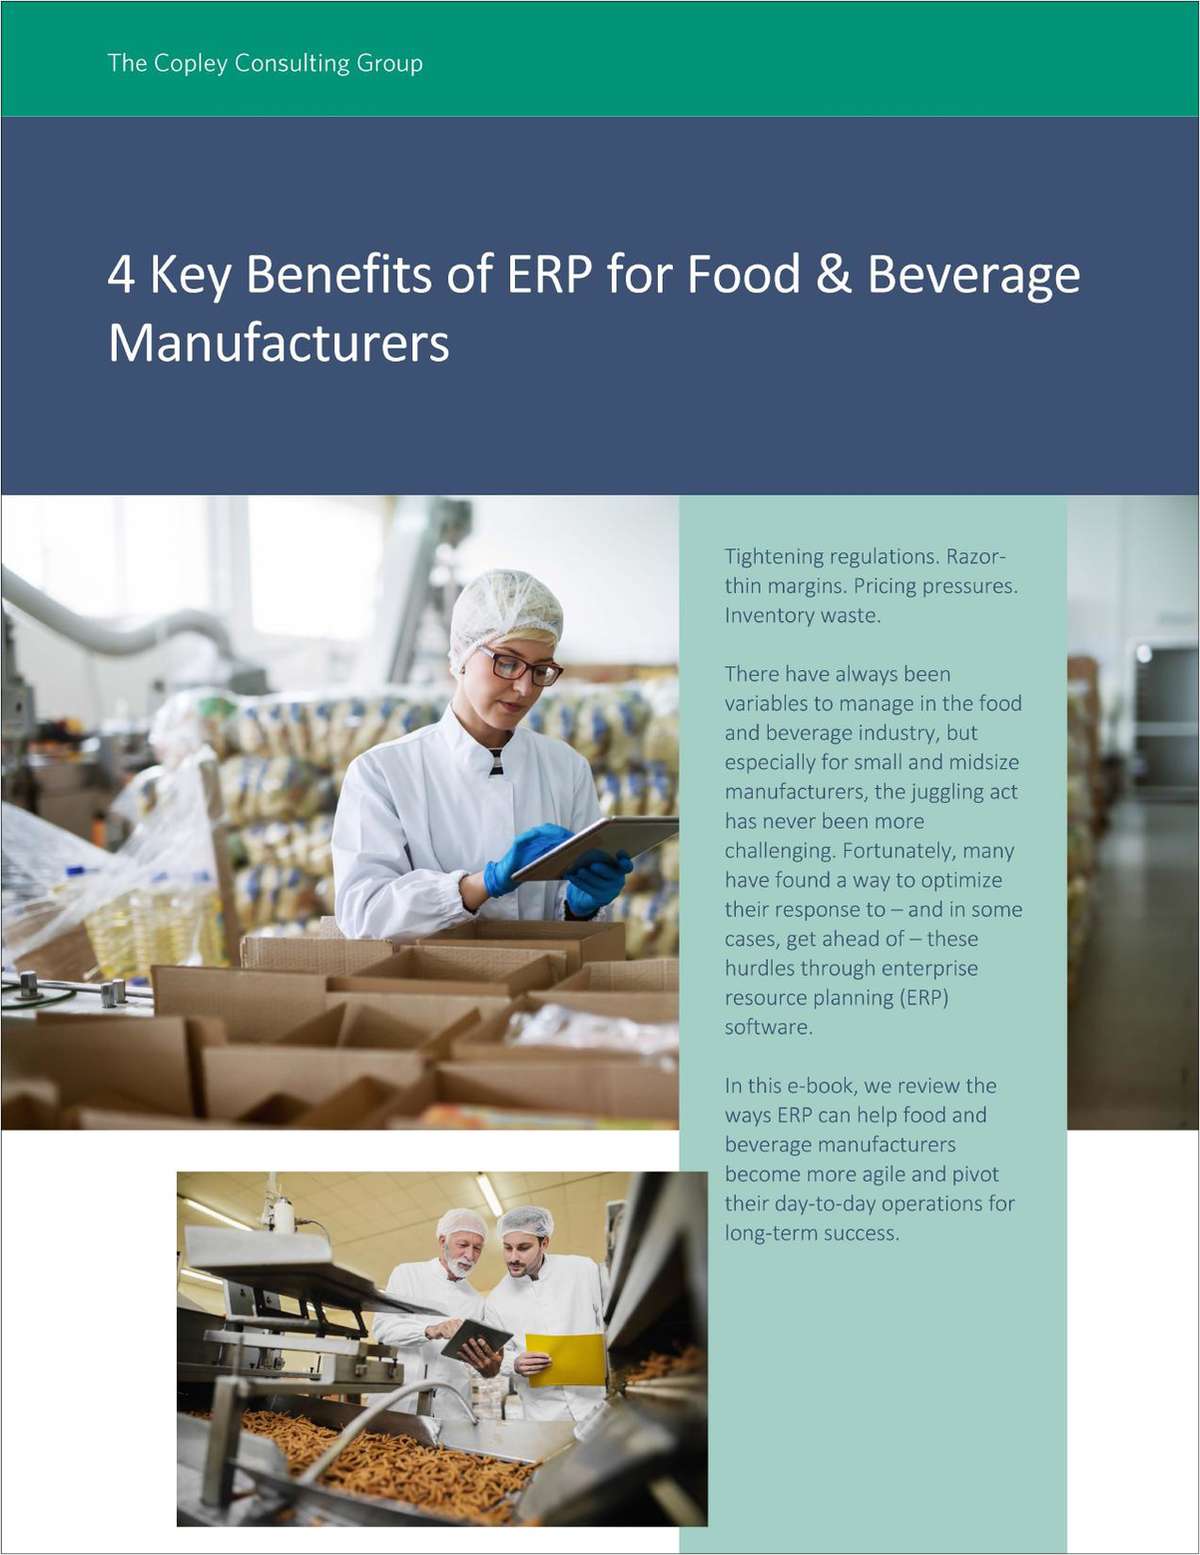 4 Benefits of ERP for Food & Beverage Manufacturers